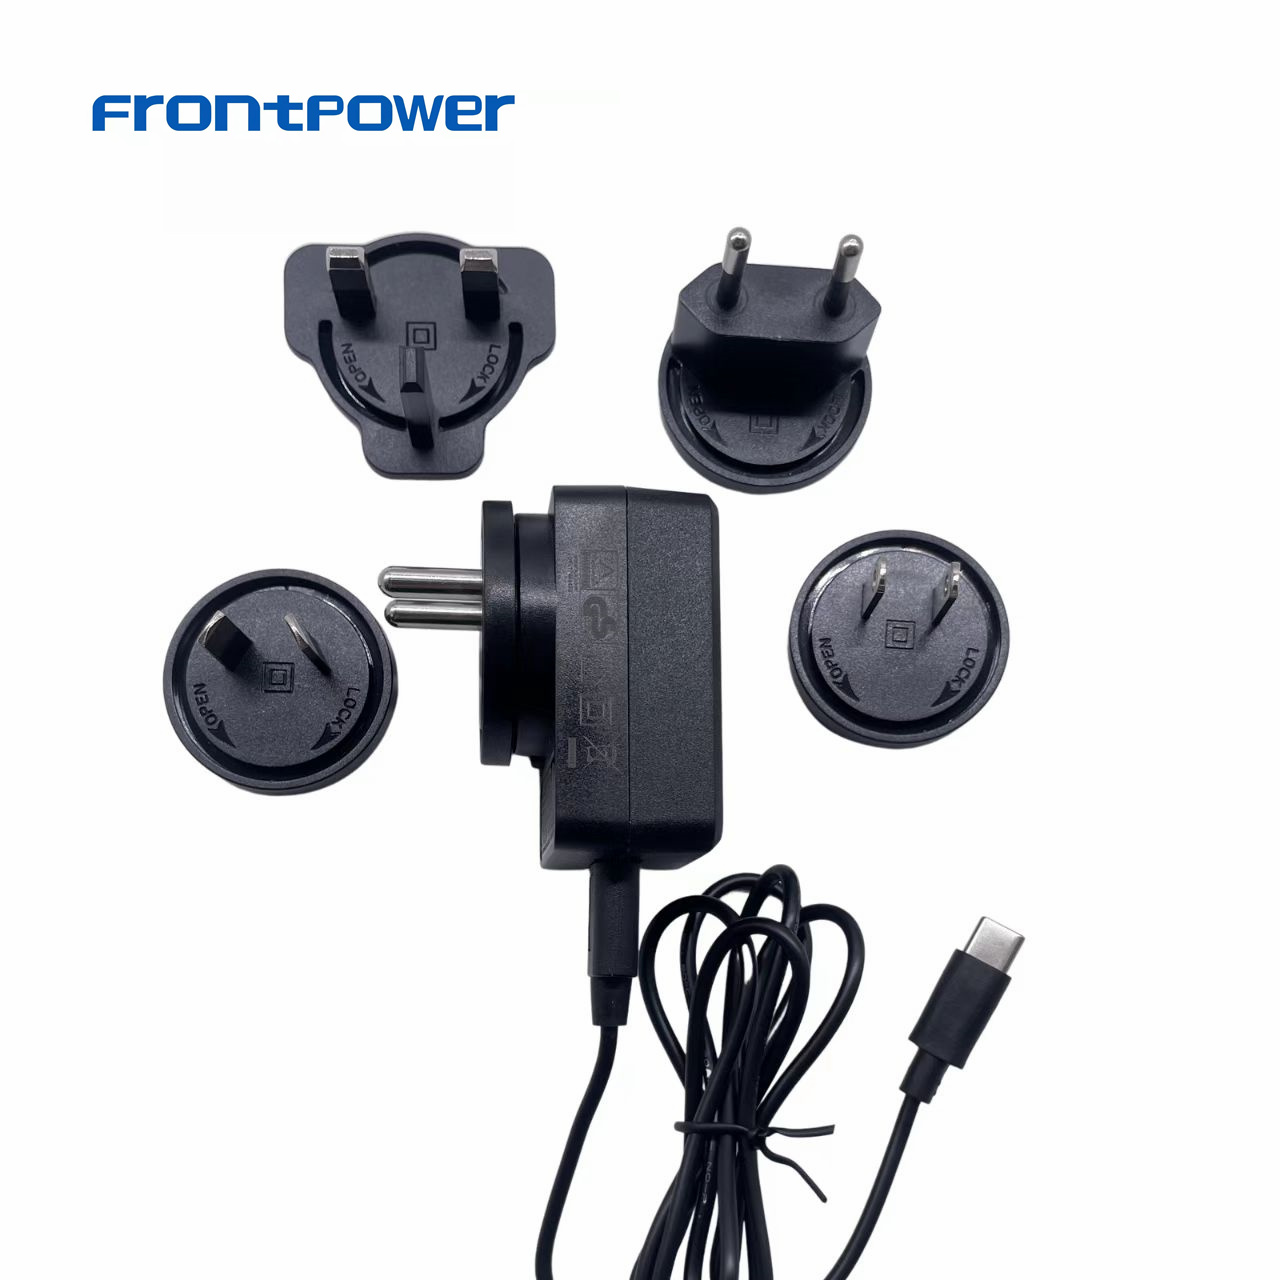 5V 3A detachable type power adapter with BIS certification